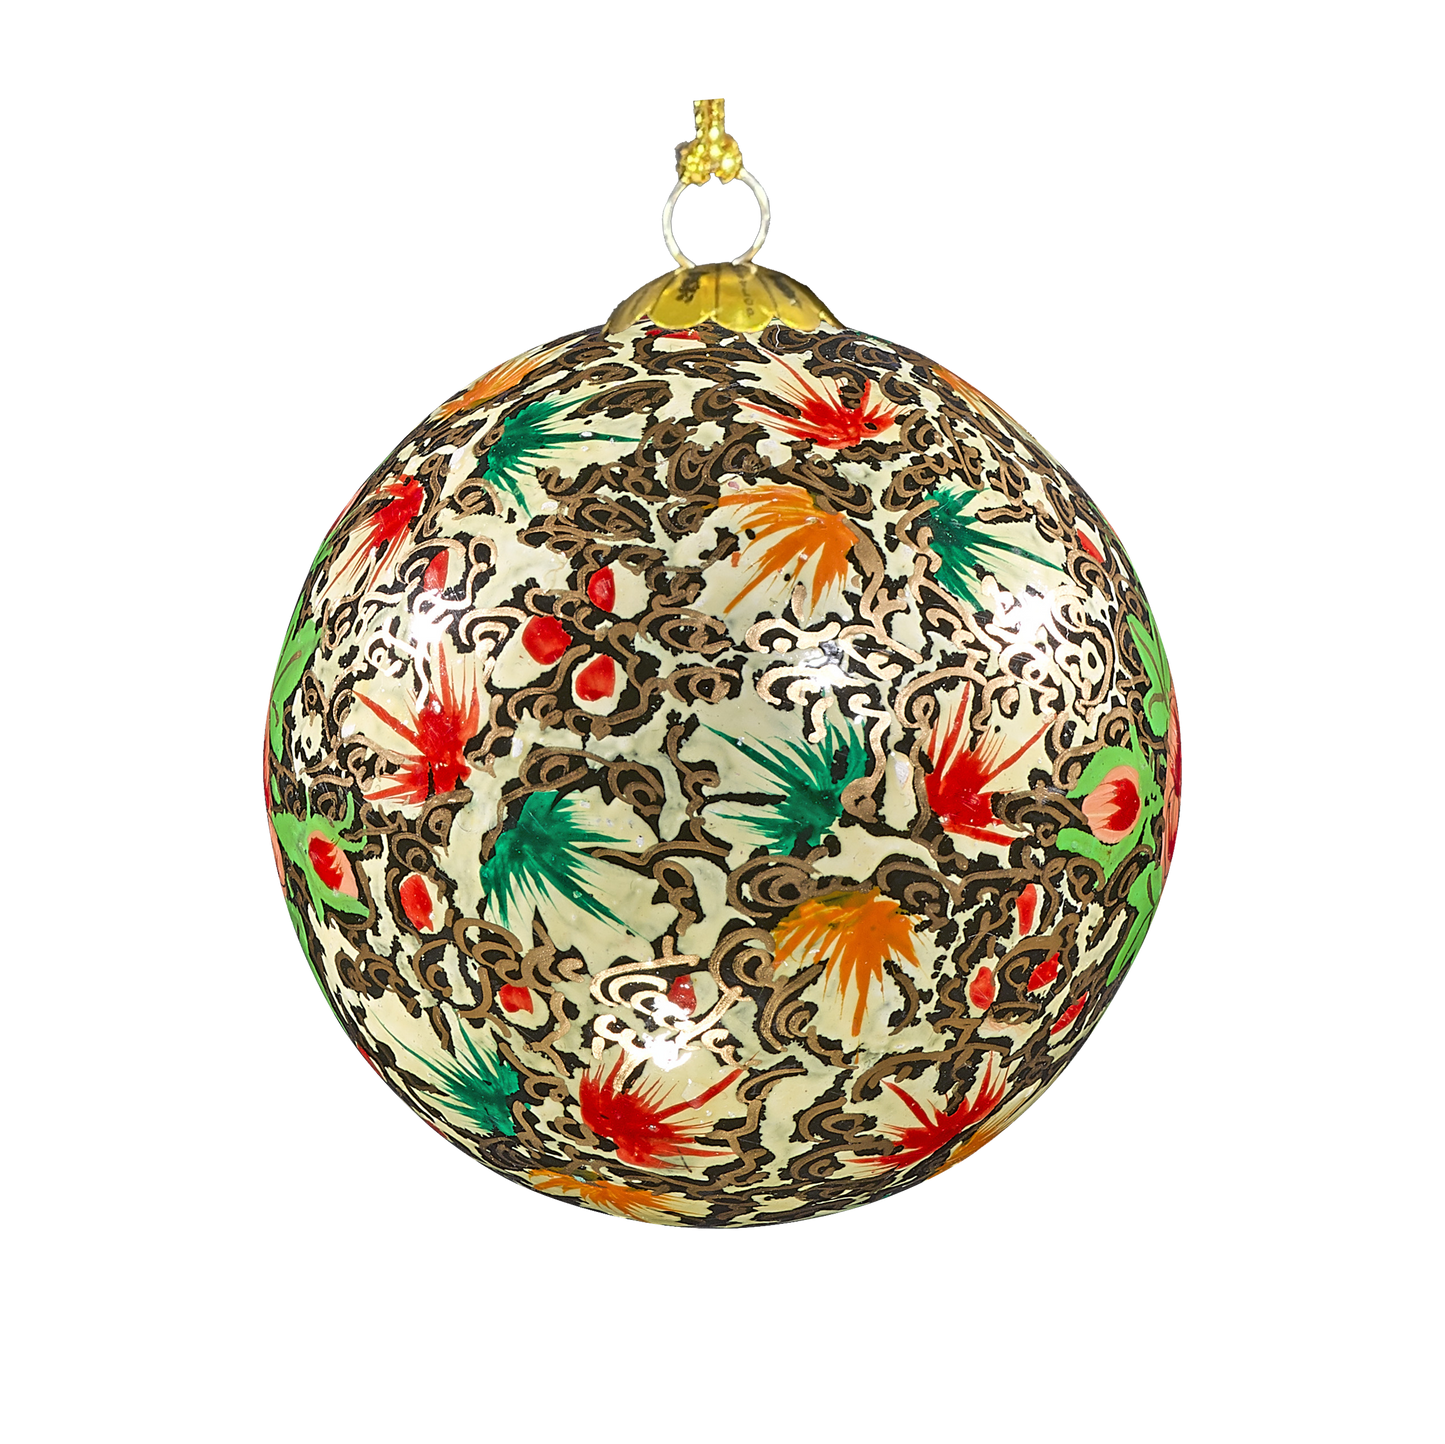 Colorful Christmas Bauble for Christmas tree decorations